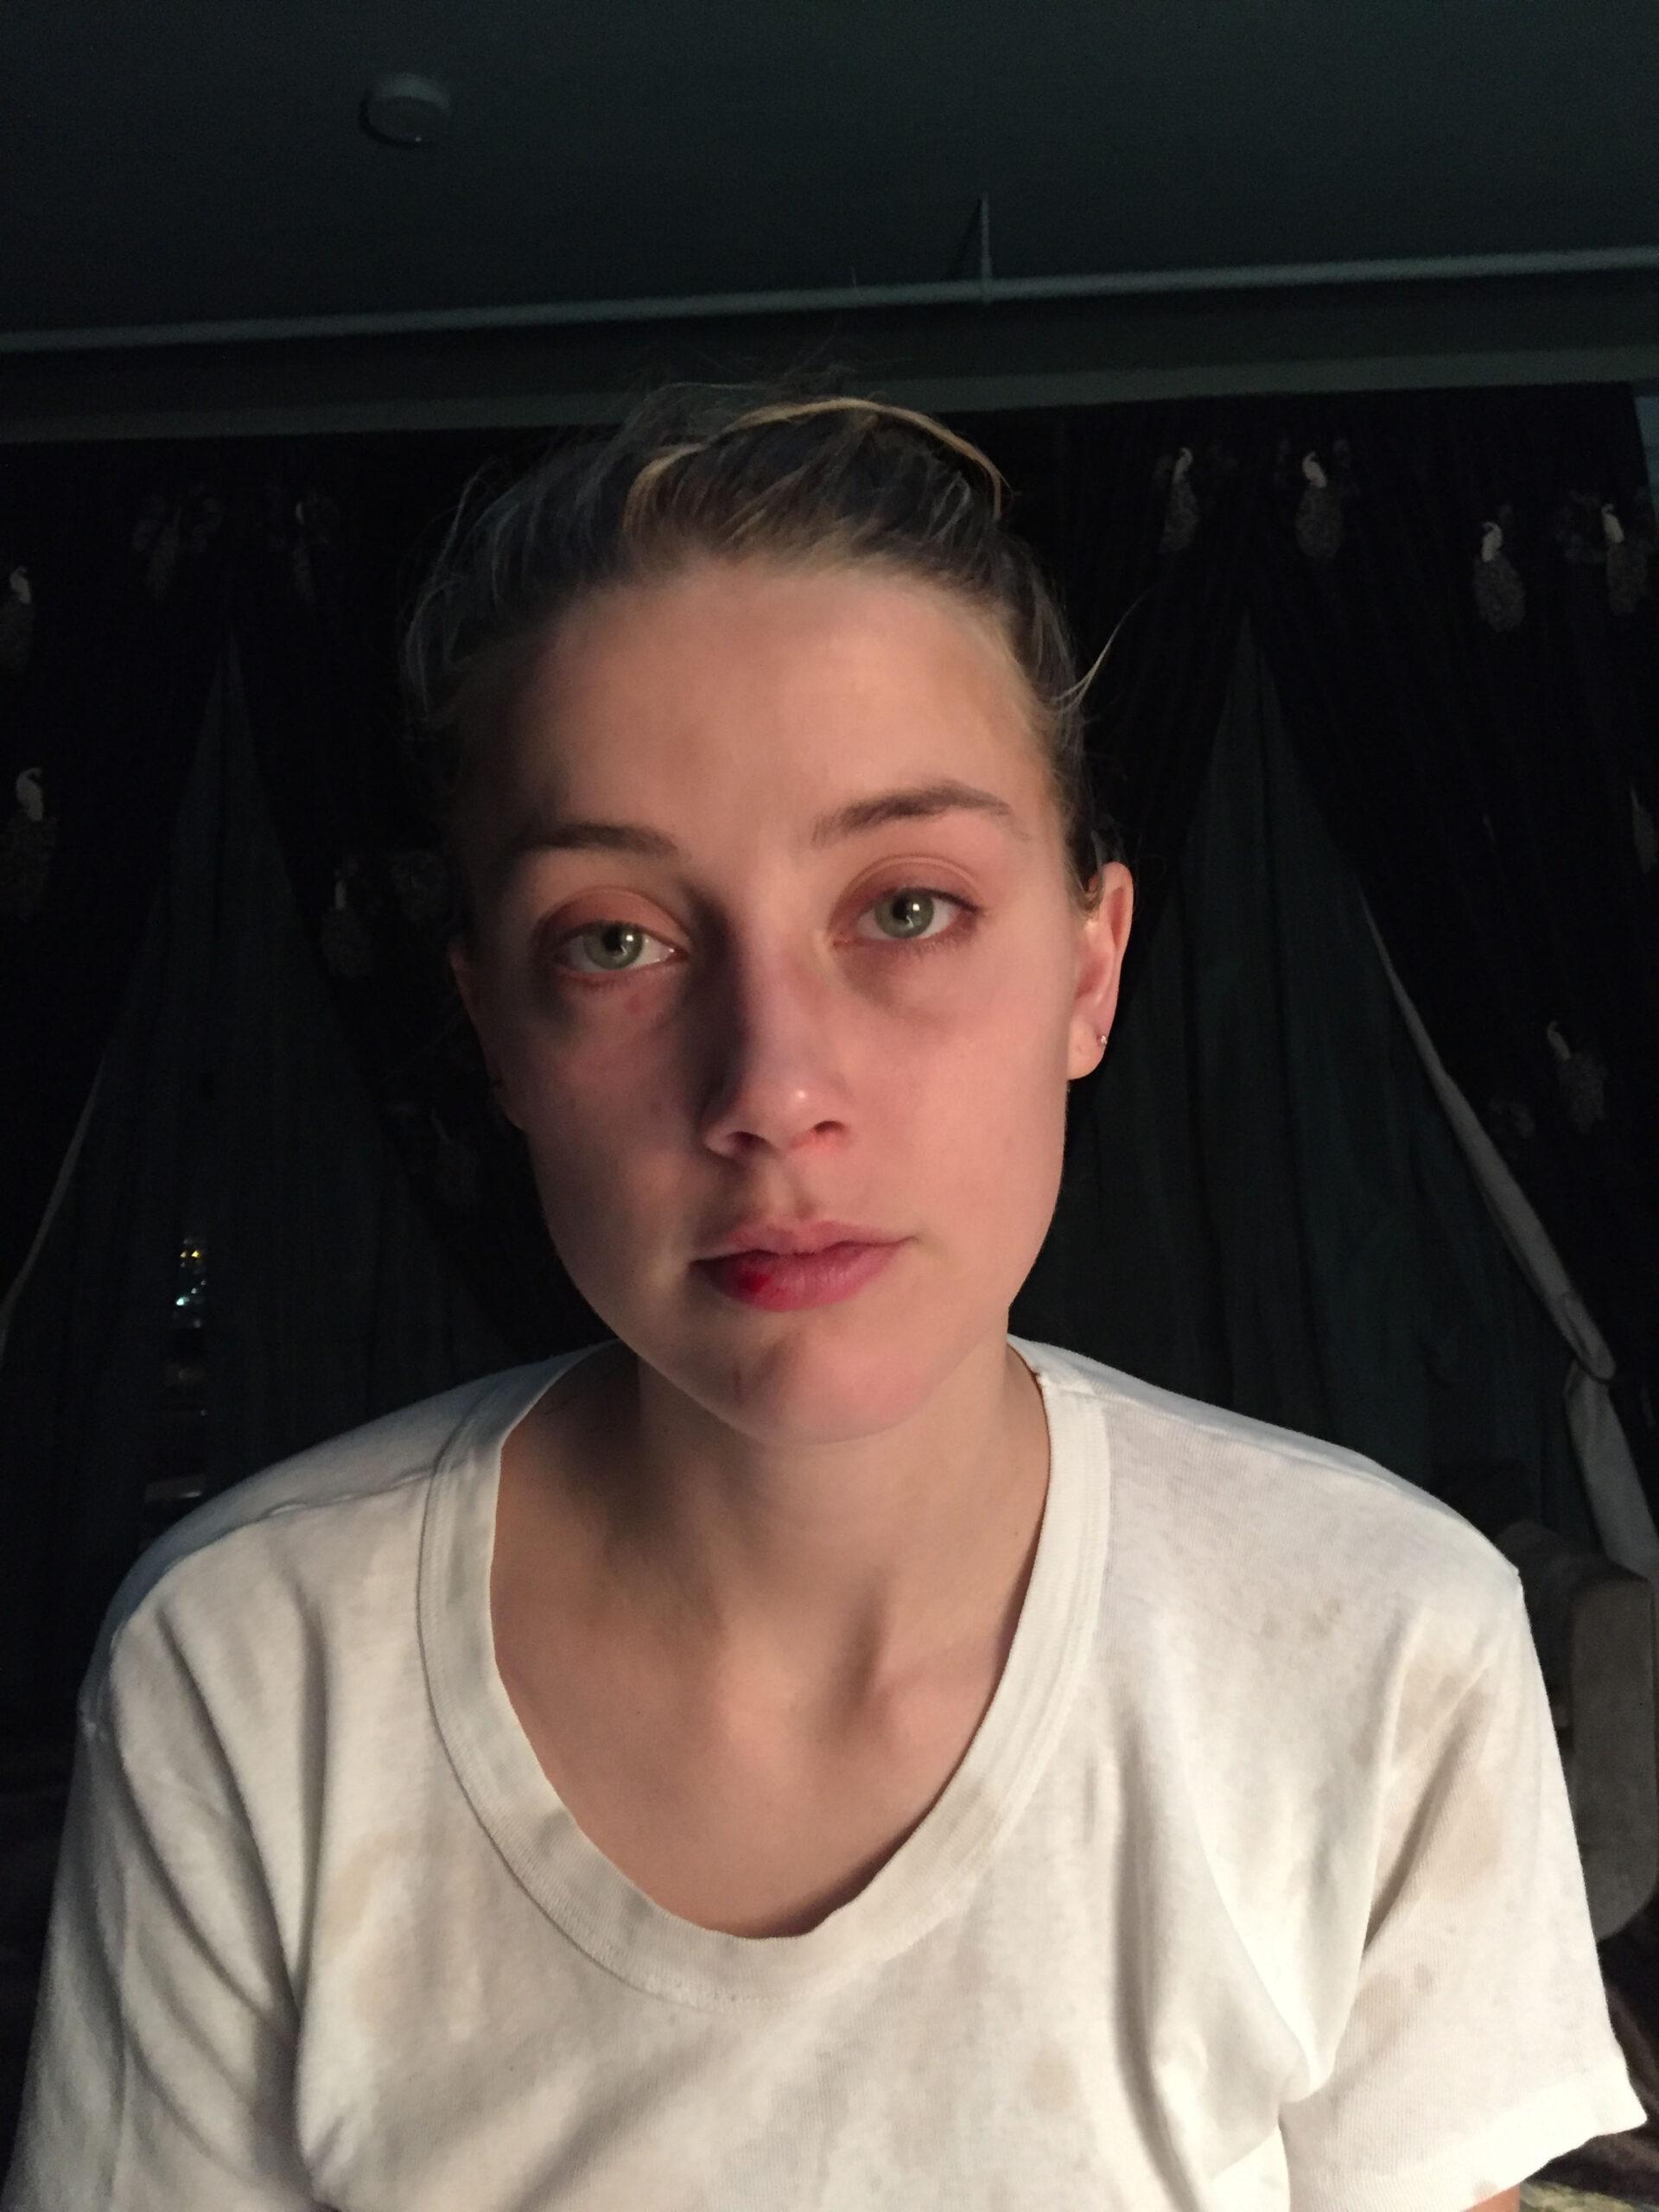 Amber Heard shows her bruised face and ripped scalp in disturbing photos taken after a 2015 fight where she claims Johnny Depp beat her so badly she thought she was going to die. The photos were shown in court as Heard gave evidence in the ex-couple’s defamation trial, claiming Depp headbutted her and dragged her by her hair, leaving chunks of it all over the floor. Heard told Fairfax County Circuit Court she suffered two black eyes and a split lip during a fight with Depp in December 2015. According to a report of the proceedings published by the Daily Mail, Heard said Depp asked her, “You really want to go now, tough guy?’ before punching her. Heard said: “I look him right in the eyes. It was a really still moment. “(He said) ‘You want to go again, tough guy?’ I looked right up at his face, he balled up his face, leaned back and headbutted me square in the nose. “Instantly (I felt) searing pain. It's one of the few memories I have of physical pain, searing pain.” She told the court Depp dragged her by the hair into a neighboring apartment, leaving chunks of hair all over the floor. Depp got on top of her with her face in a pill and was repeatedly beating her, the court heard. Heard said: 'He's trying to hold me with his knee on my back and he's punching me with a closed fist repeatedly. “I remember the sound of Johnny's voice he got next to my ear and he was screaming over and over again, ‘I f**king hate you! I f**king hate you!’ Over and over. ‘F**king hate you!’ Pounding the back of my head with his fist. “I could hear myself scream until I couldn't hear myself anymore, I could just hear him say he was going to kill me and he sounded like an animal in pain when he was saying he f**king hated me. “He sounded different, like he was in agony. He just hit me over and over and over again. I got really still and it felt in my body quiet. “I thought, ‘This is how I die, he's going to kill me now. He's going to kill me and he won't even have realized it.’ “I couldn't breathe. I remember trying to scream and I couldn't scream suffocating in this pillow top with him holding me down punching me. I don't have any memory after that until I woke up.” The former couple are facing each other at a trial at Fairfax County Circuit Court in Virginia as Depp sues for $50 million over a December 2018 op-ed Heard wrote for the Washington Post declaring herself a domestic violence survivor. The article did not mention Depp by name, but he claims he lost his iconic role of Captain Jack Sparrow in the Pirates of the Caribbean franchise because of the “clear implication” he was Heard’s abuser. 05 May 2022 Pictured: Amber Heard shows two black eyes and a split lip in photos taken after an alleged December 2015 fight with Johnny Depp, in which she claims he beat her so badly she thought she was going to die. The photos were submitted as defence exhibits in the ex-couple's defamation trial at Fairfax County Circuit Court. Photo credit: MEGA TheMegaAgency.com +1 888 505 6342 (Mega Agency TagID: MEGA854687_008.jpg) [Photo via Mega Agency]